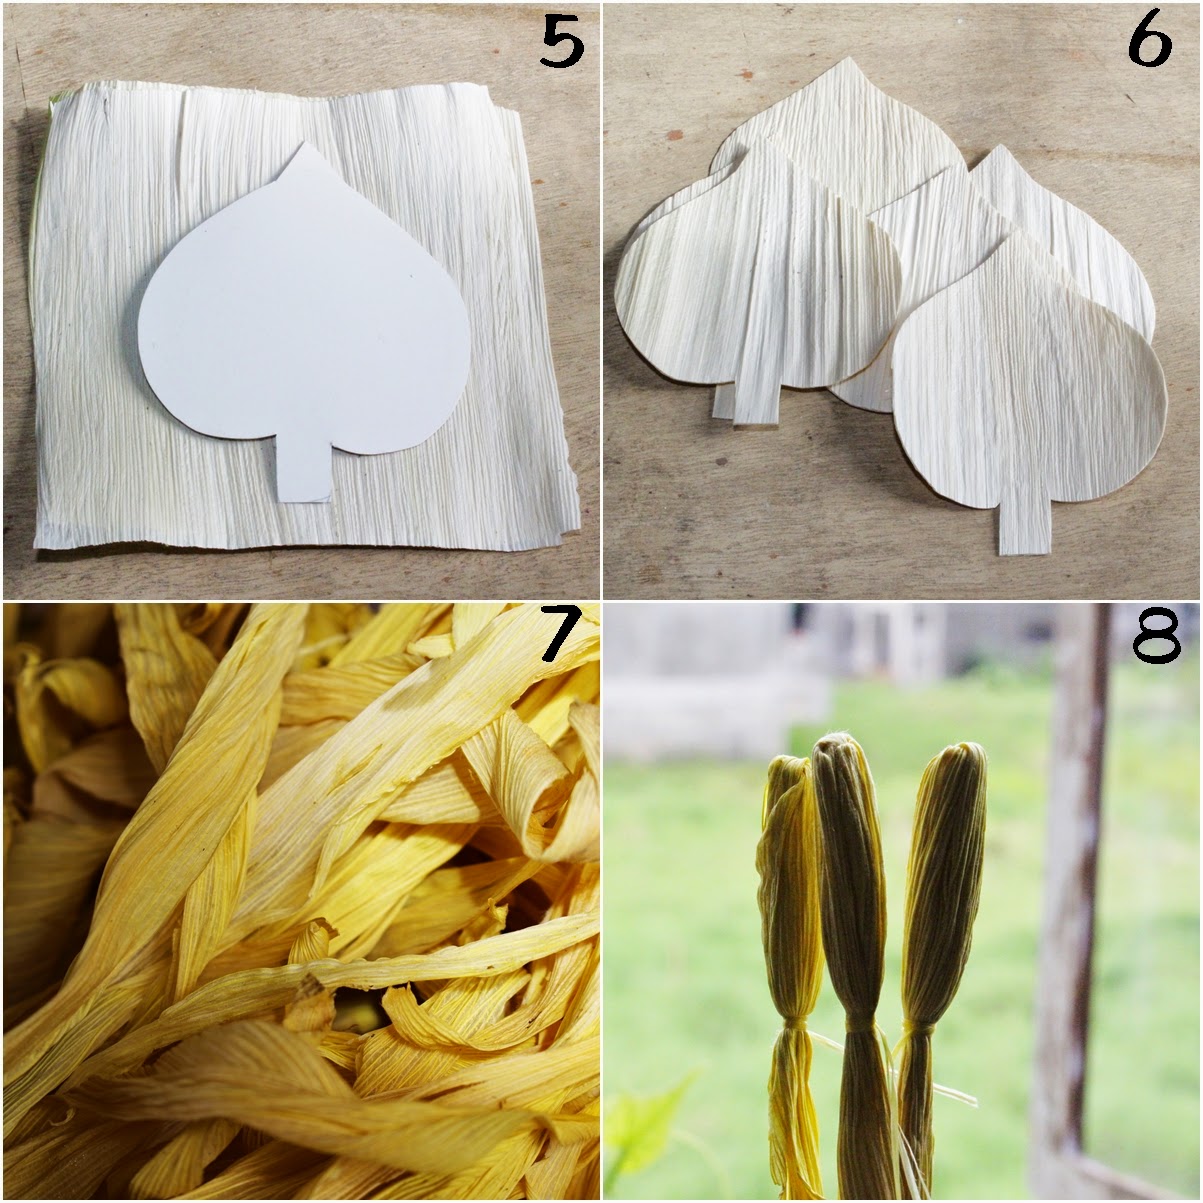 reduce-reuse-recycle-replenish-restore-diy-how-to-make-calla